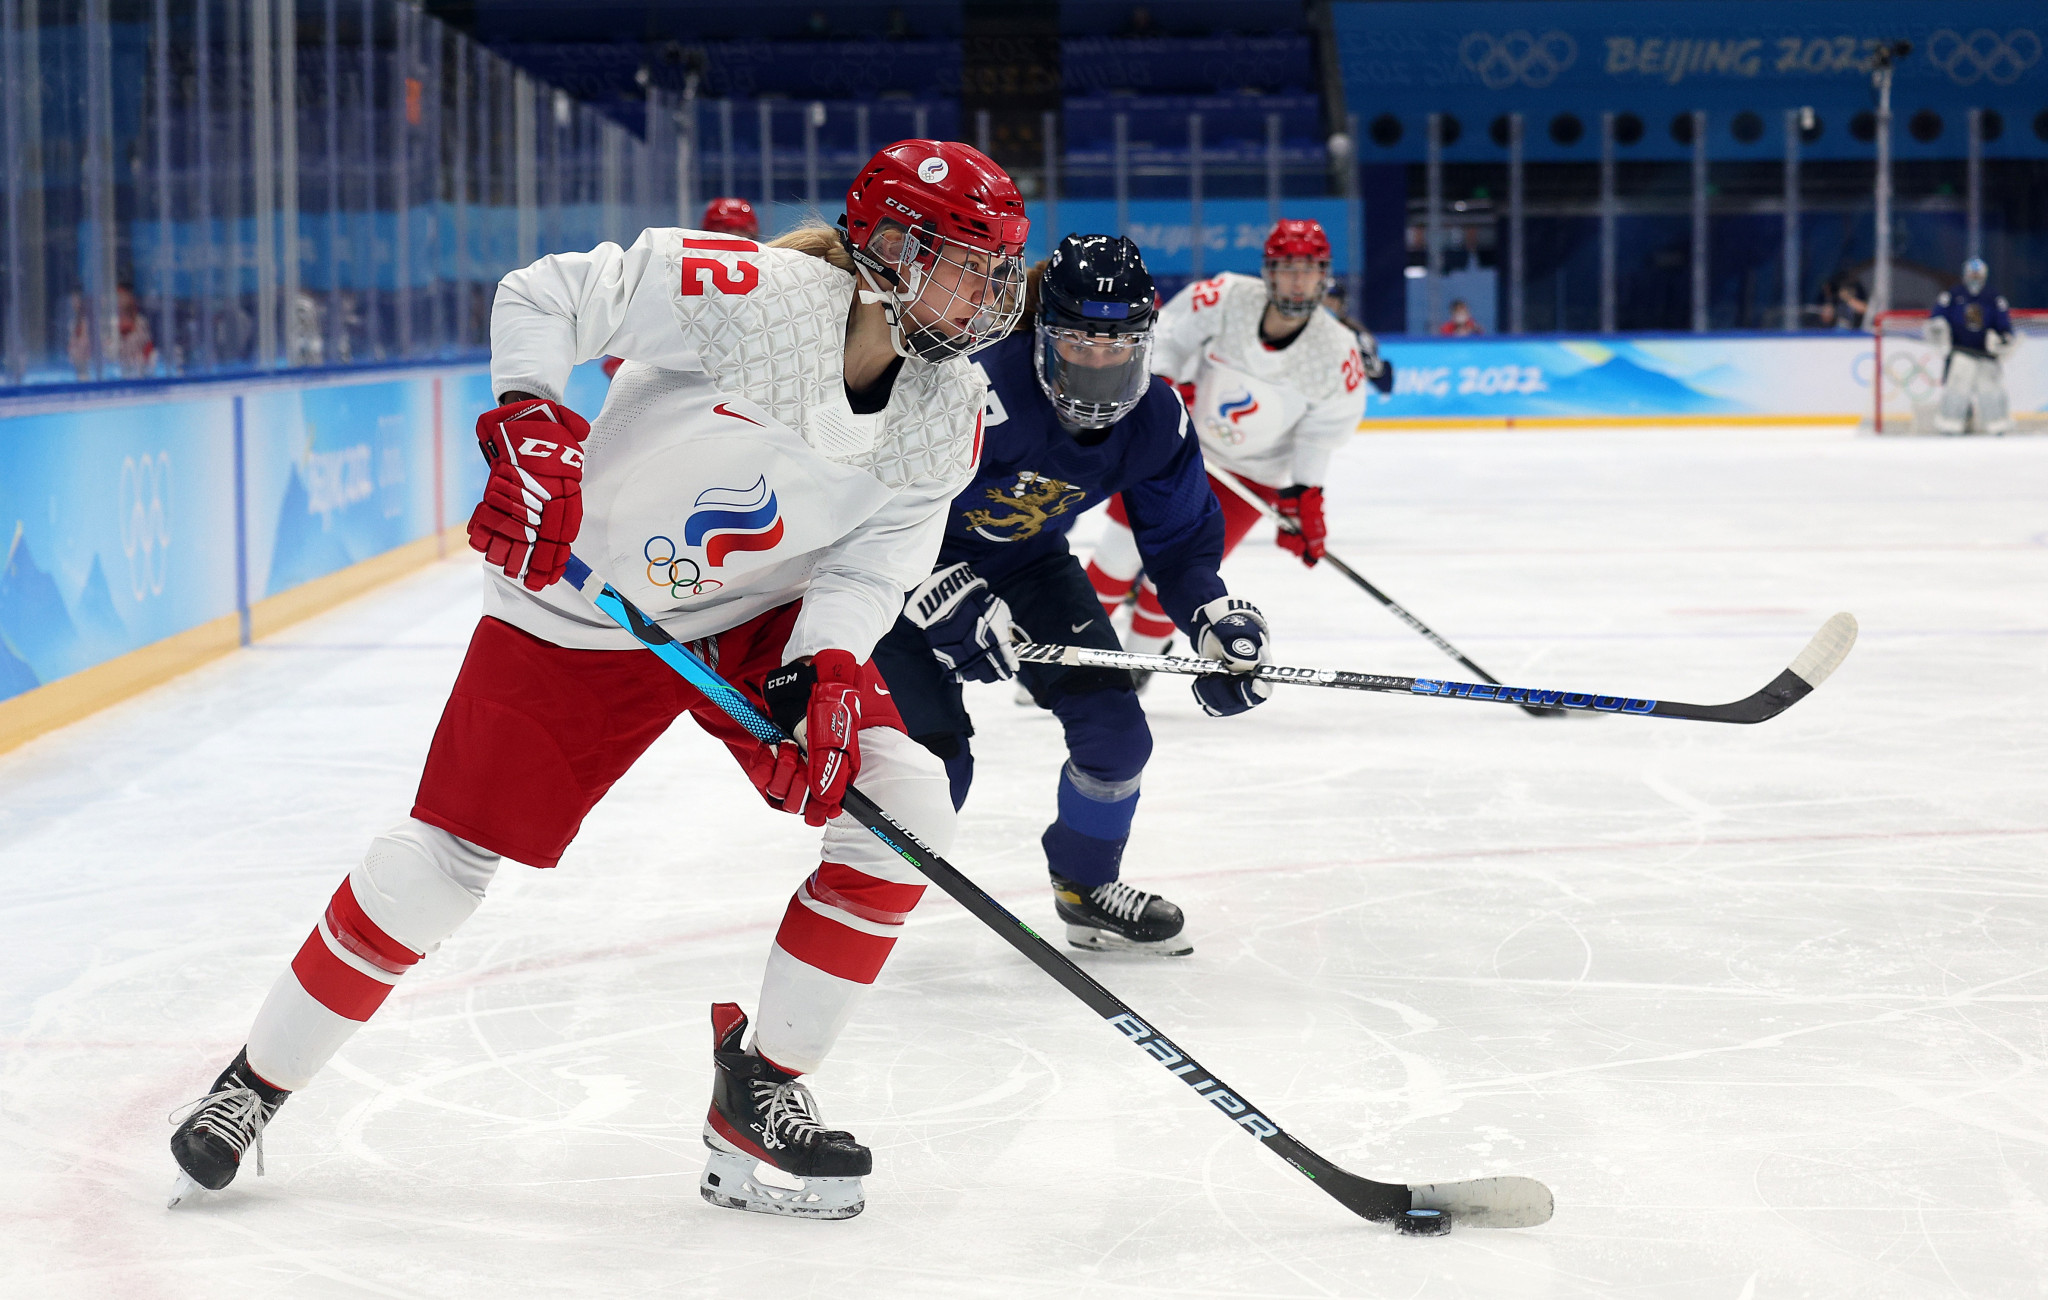 ROC ice hockey boss admits COVID cases hit double figures at Beijing 2022